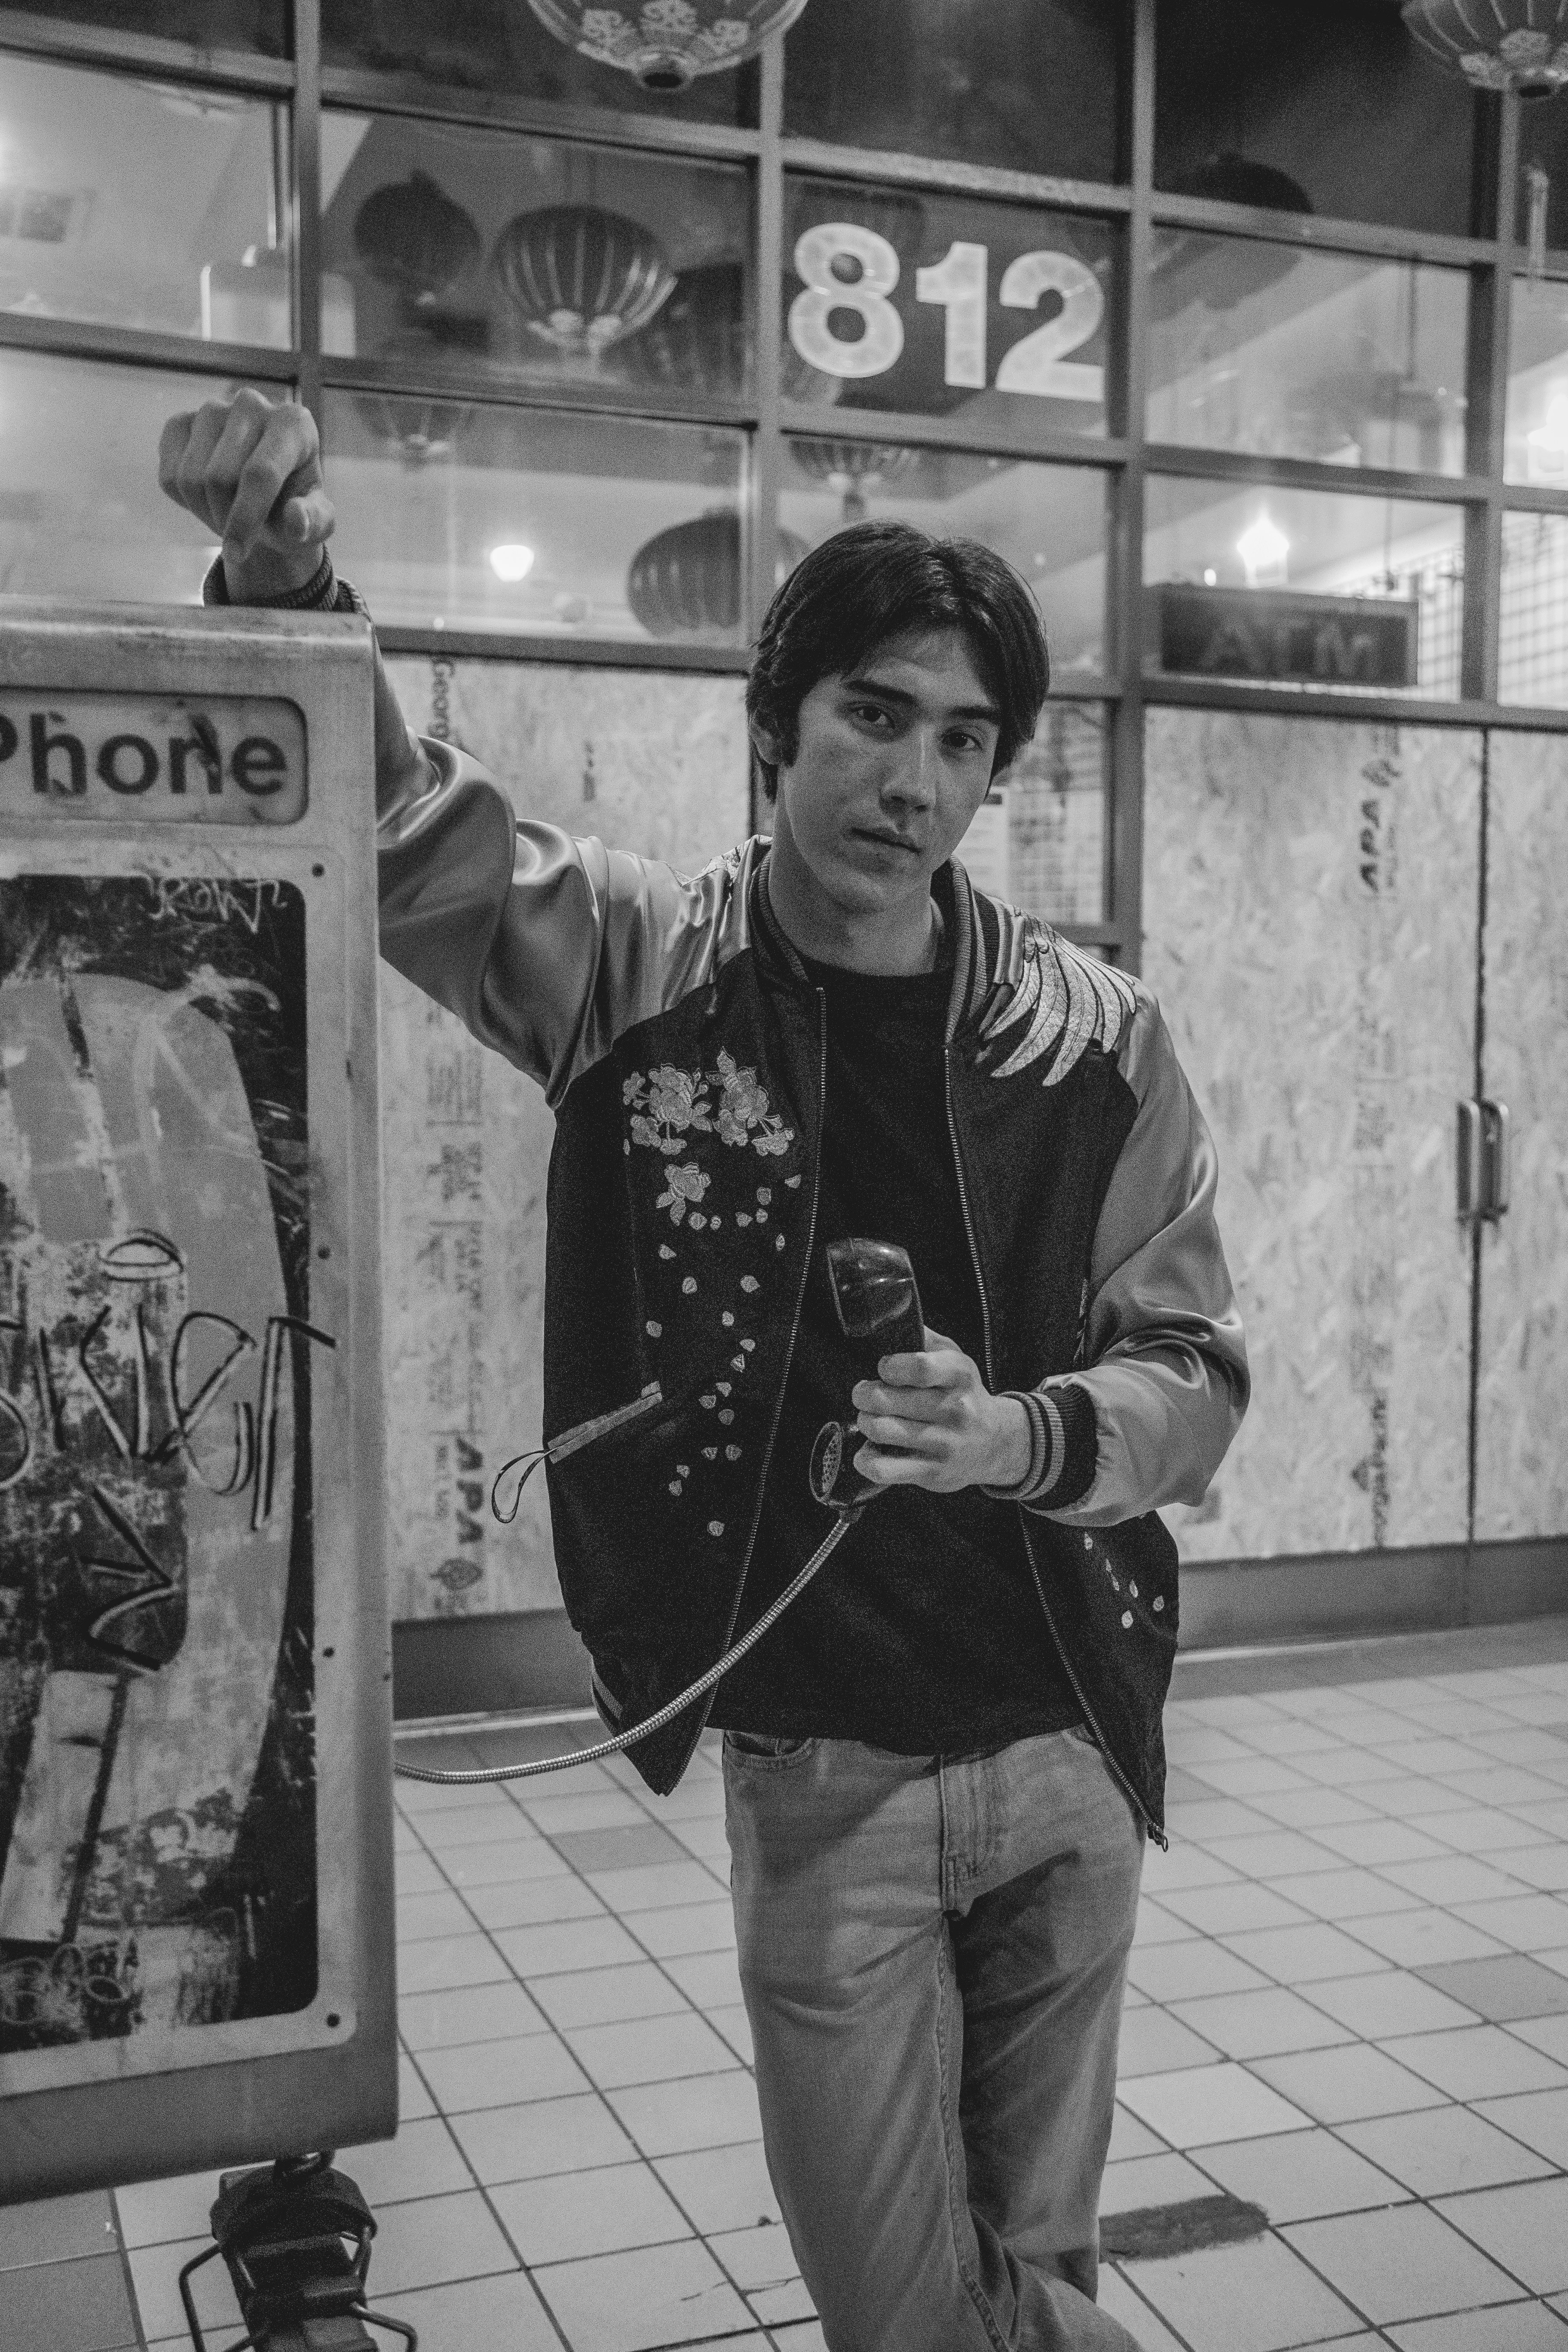 grayscale photo of man in zip up jacket holding telephone